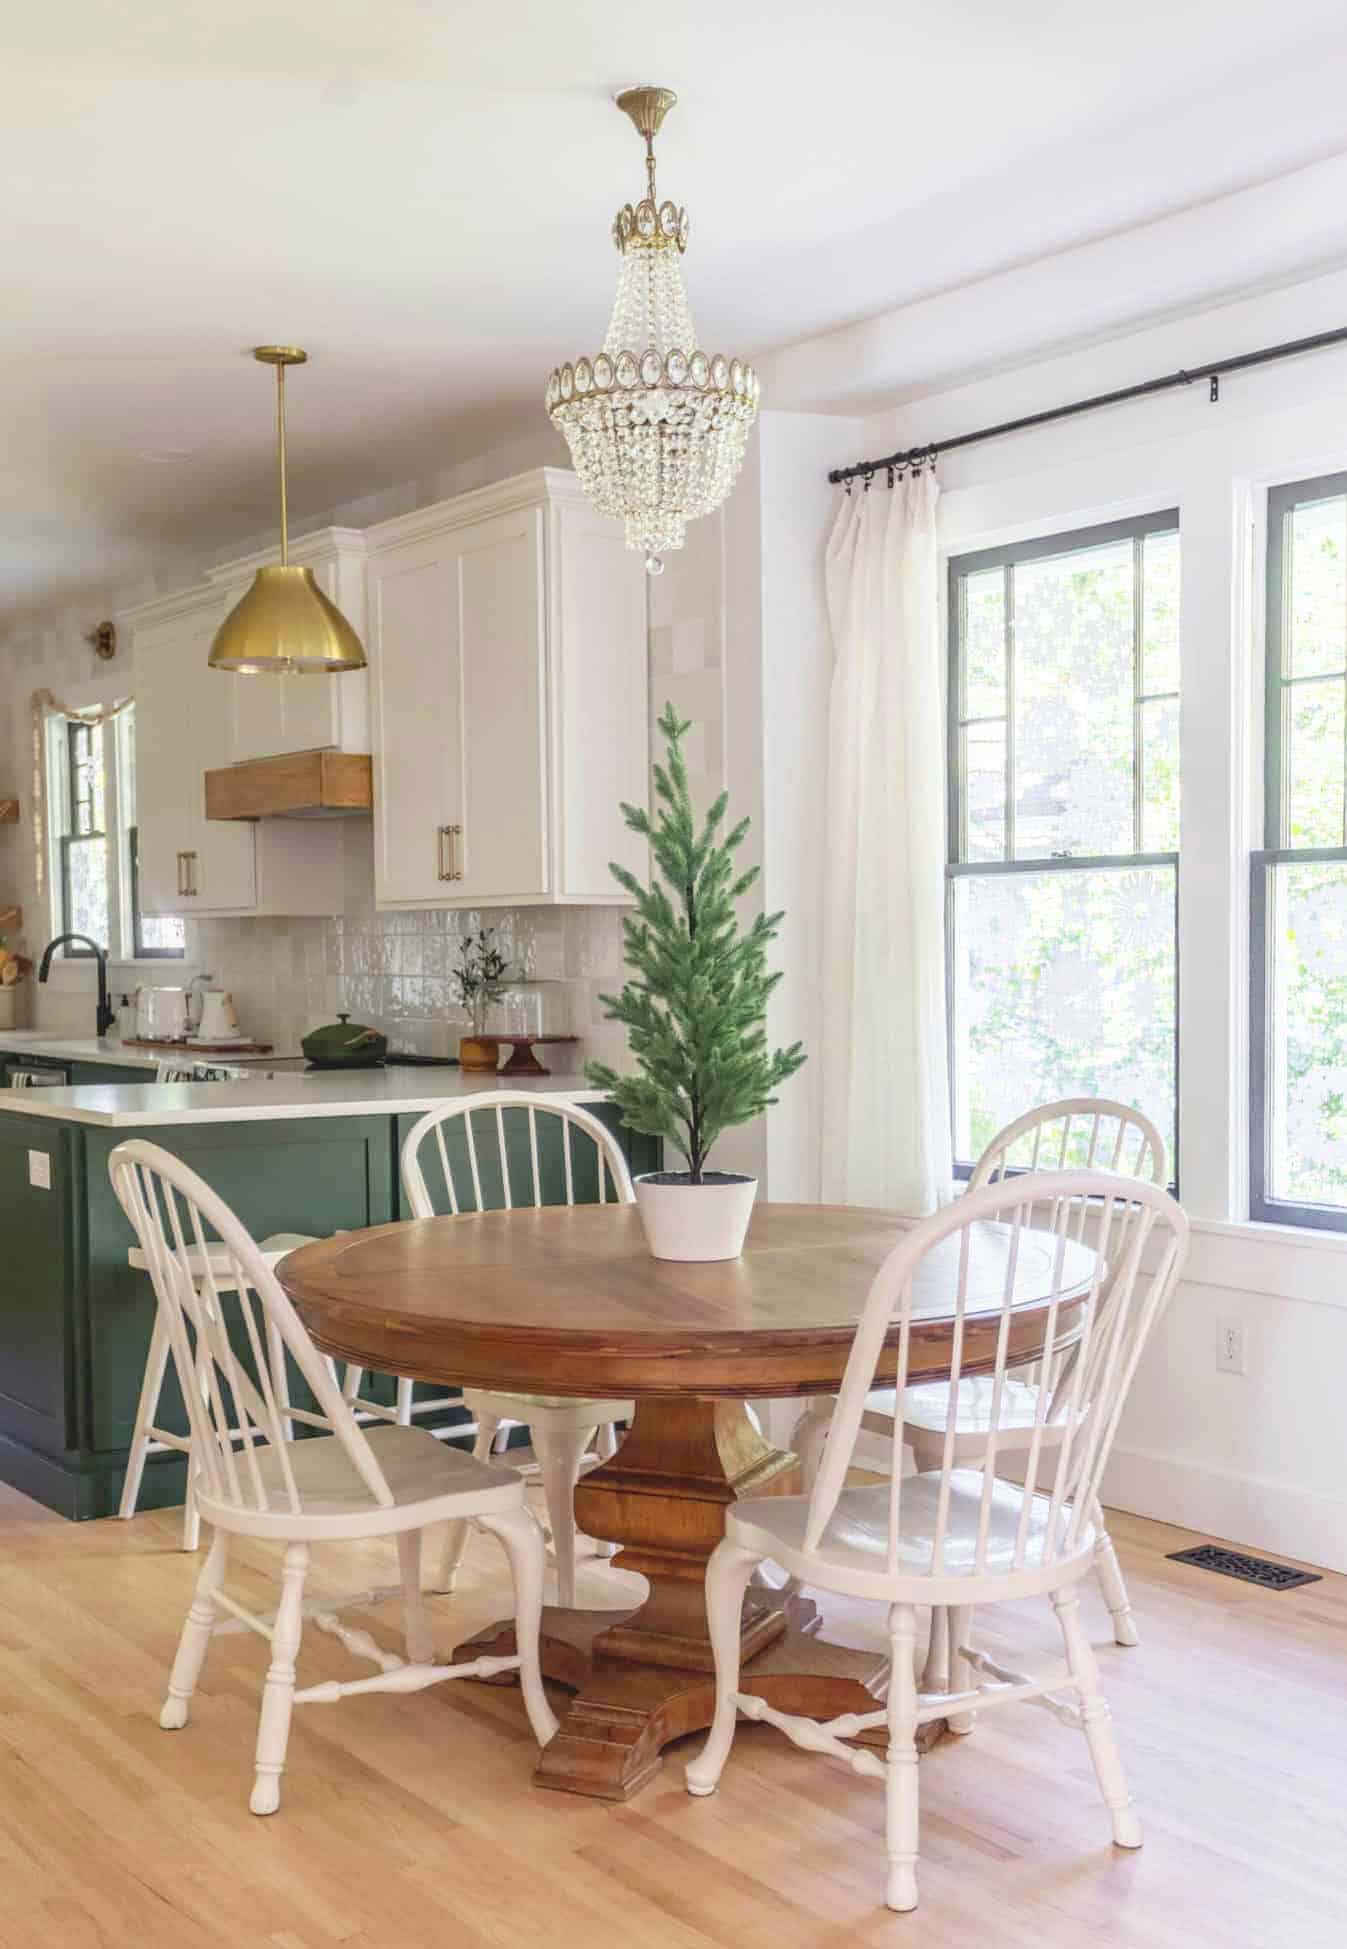 The Best Affordable Traditional Lighting (For Every Room!)